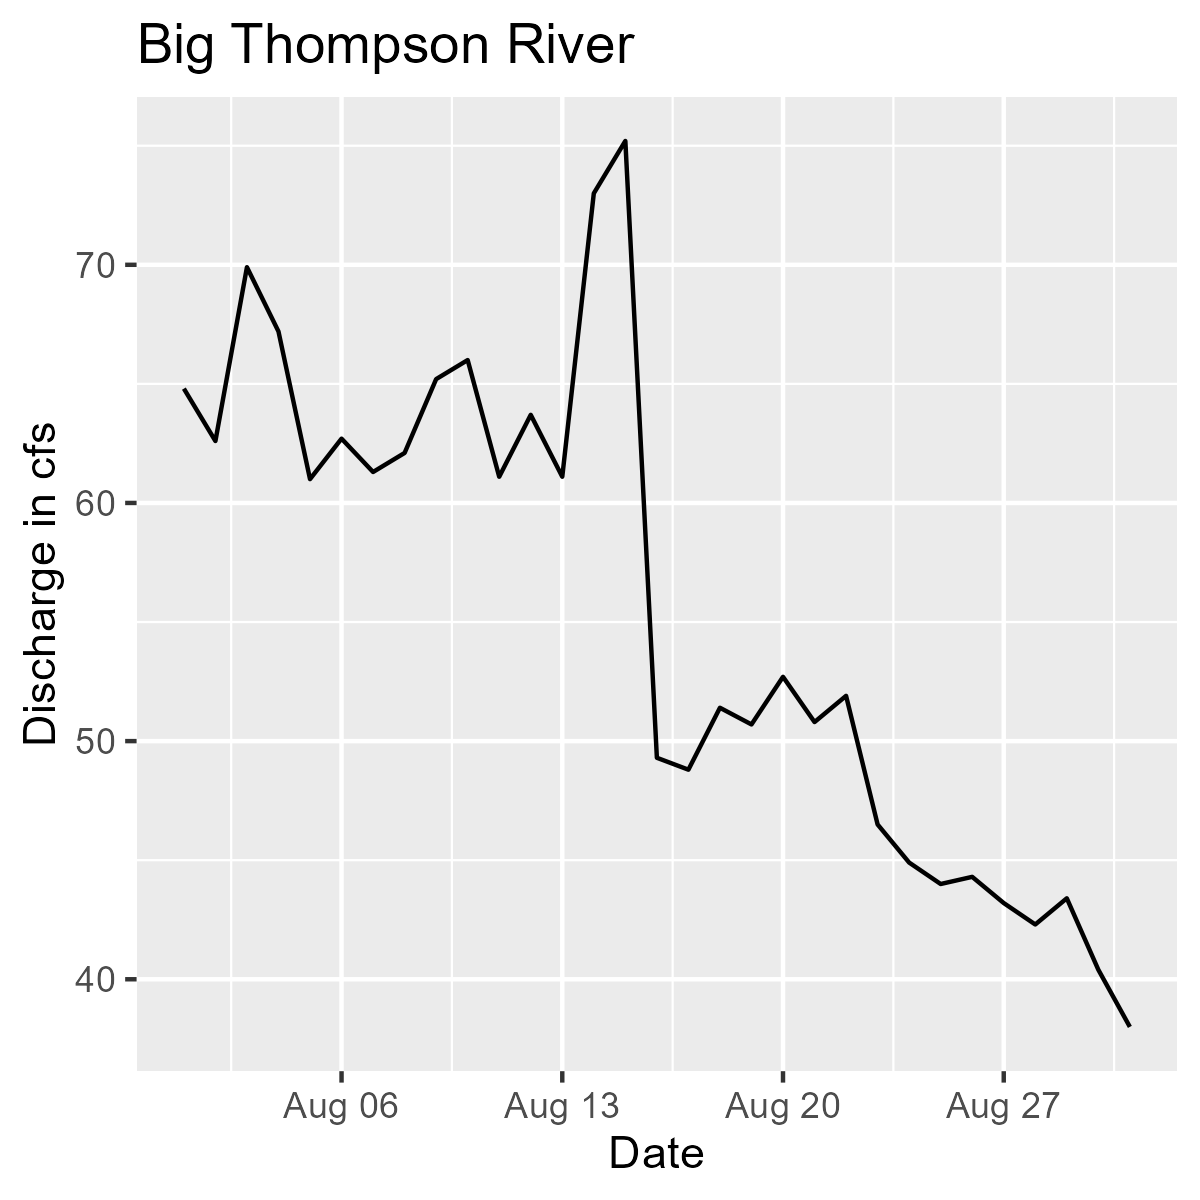 Line graph showing discharge in CFS by date for the Big Thompson River during the month of August 2018.